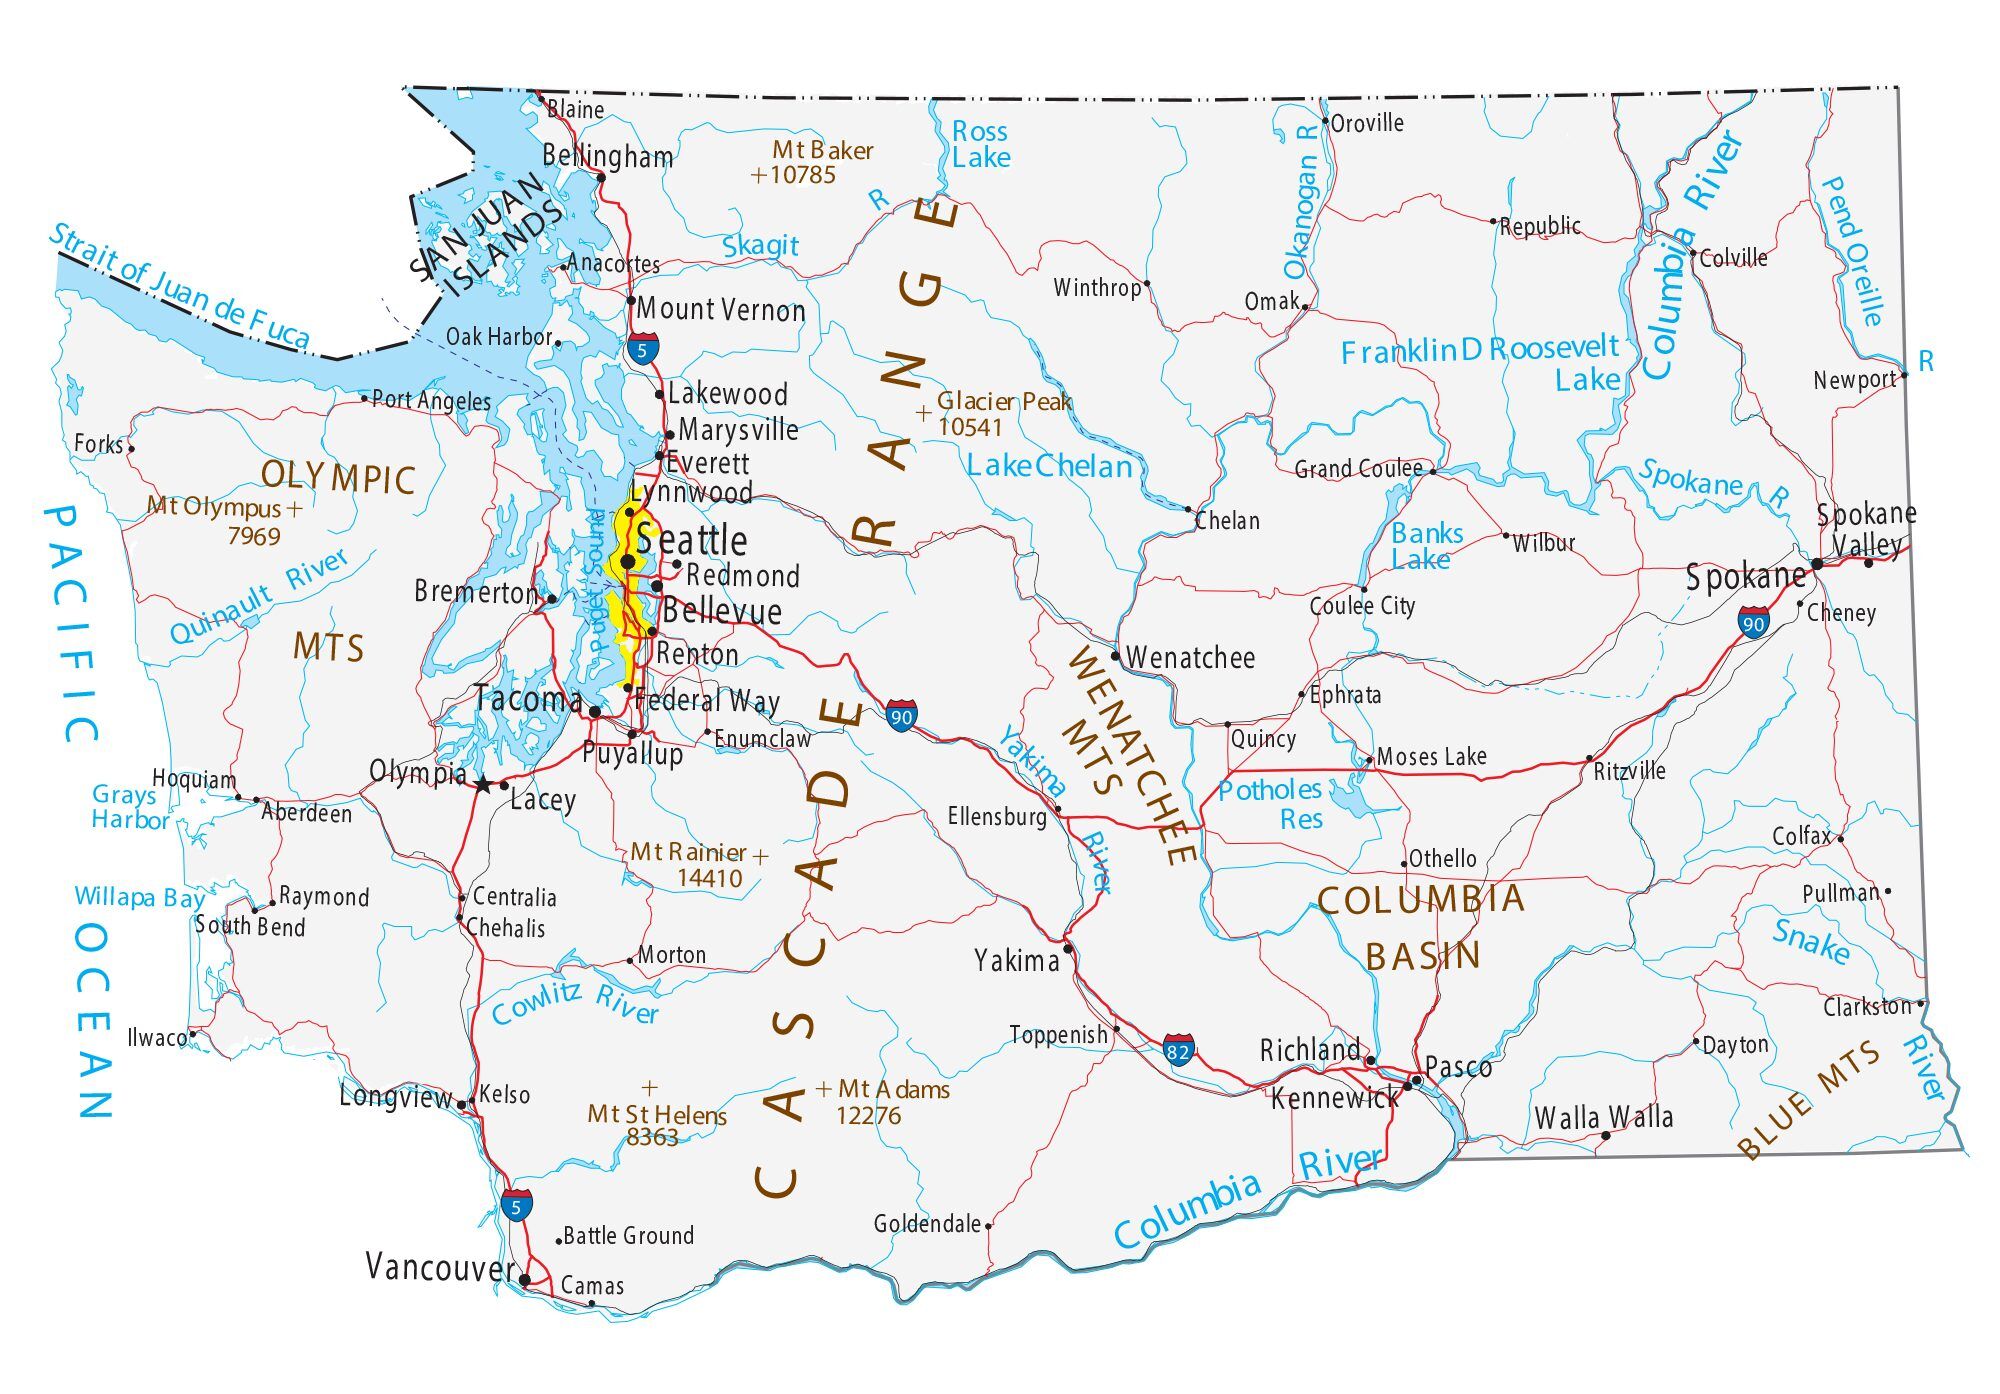 Map of Washington - Cities and Roads - GIS Geography